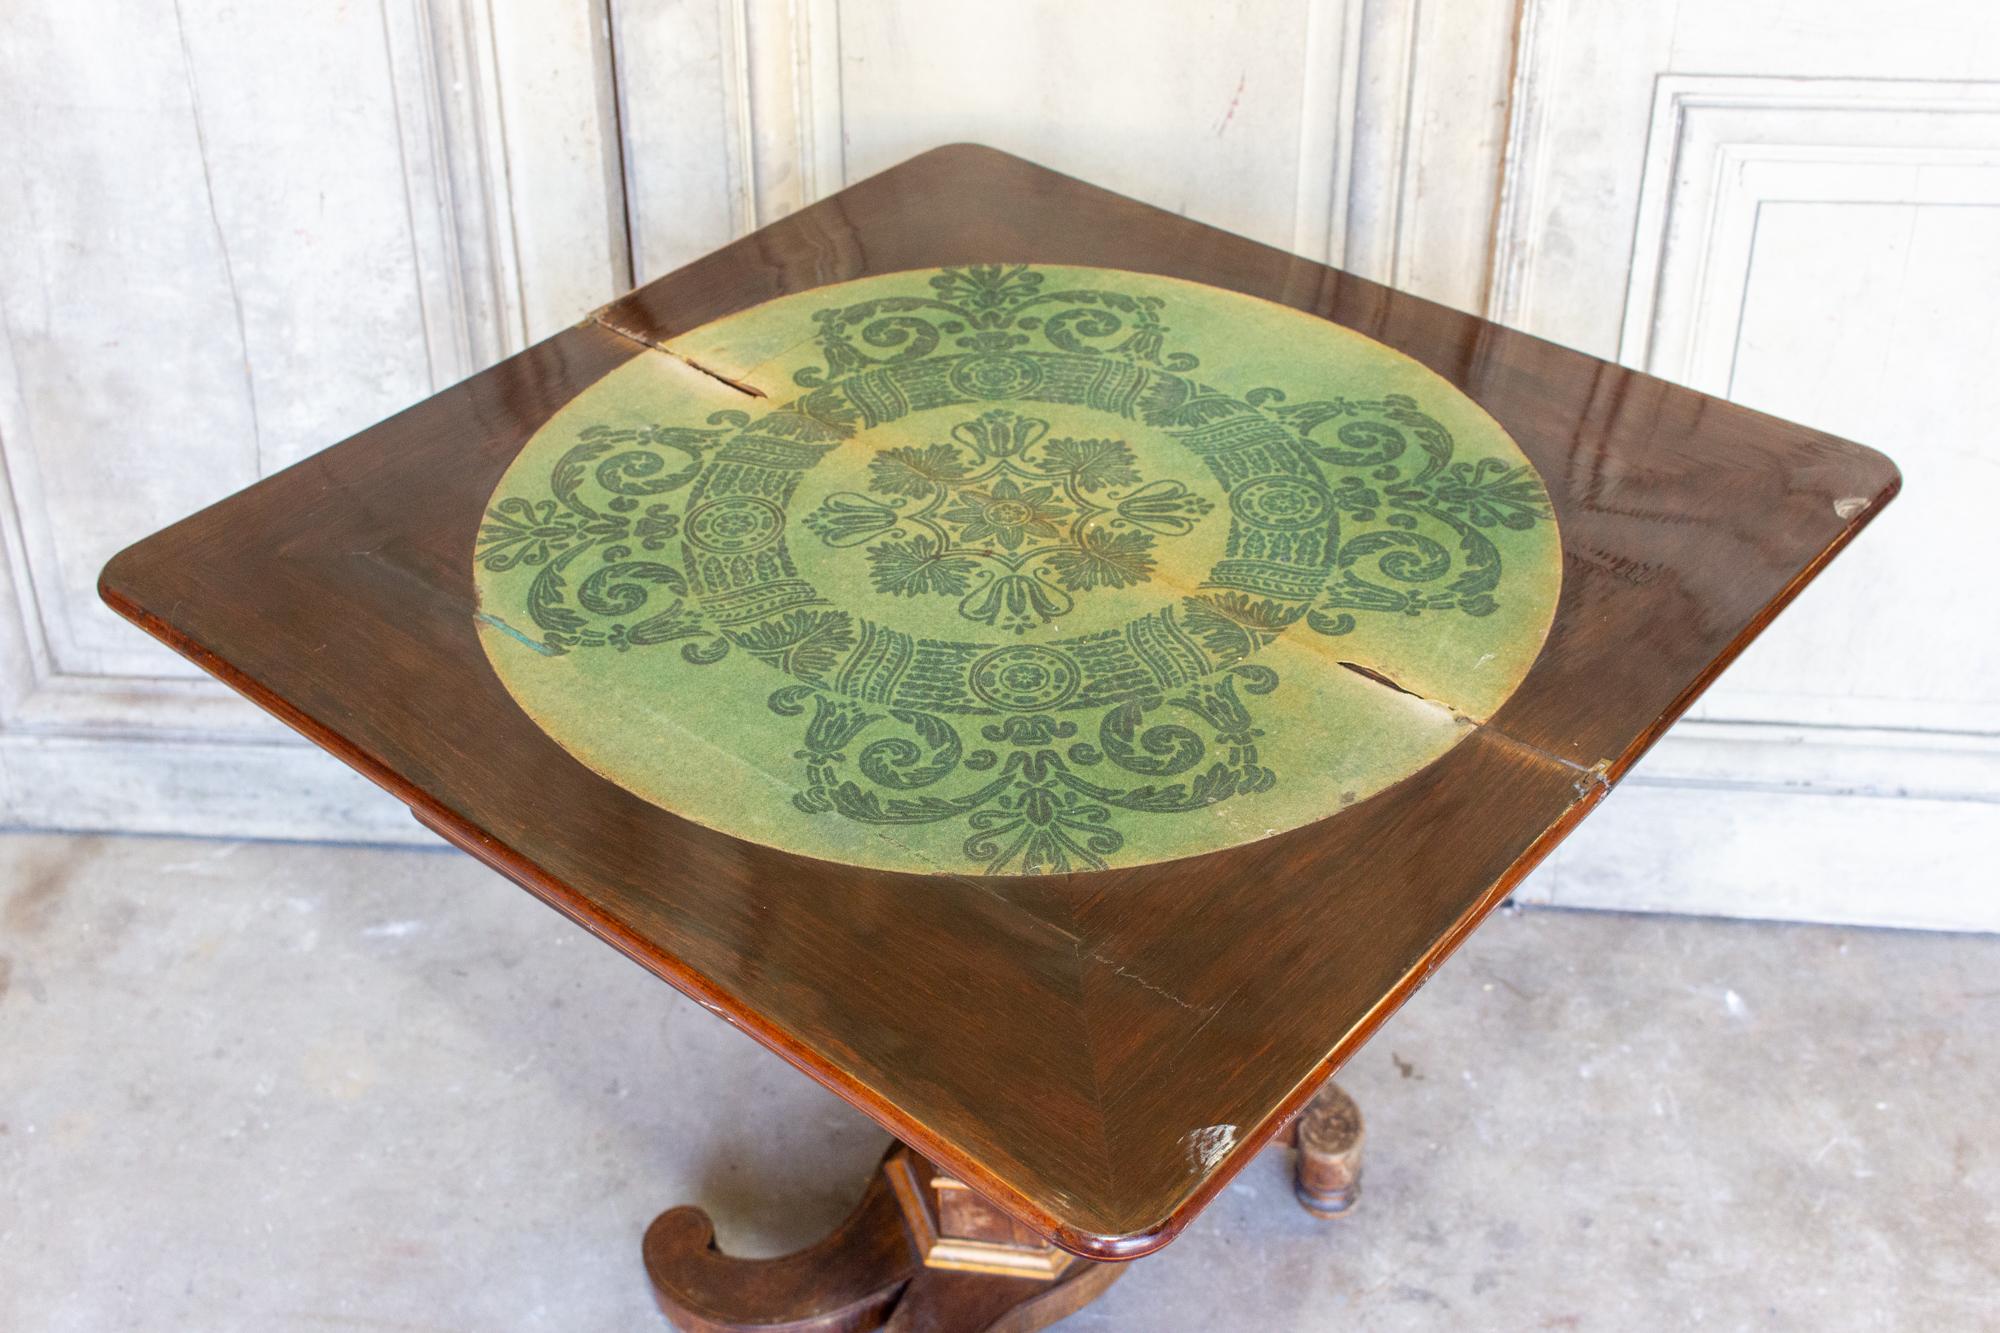 This antique French folding game table and console features inlaid wood details in the top and front. The central pedestal base has four curved legs. The inlaid veneer decoration is delicate scrollwork, appearing on both the top of the piece and the